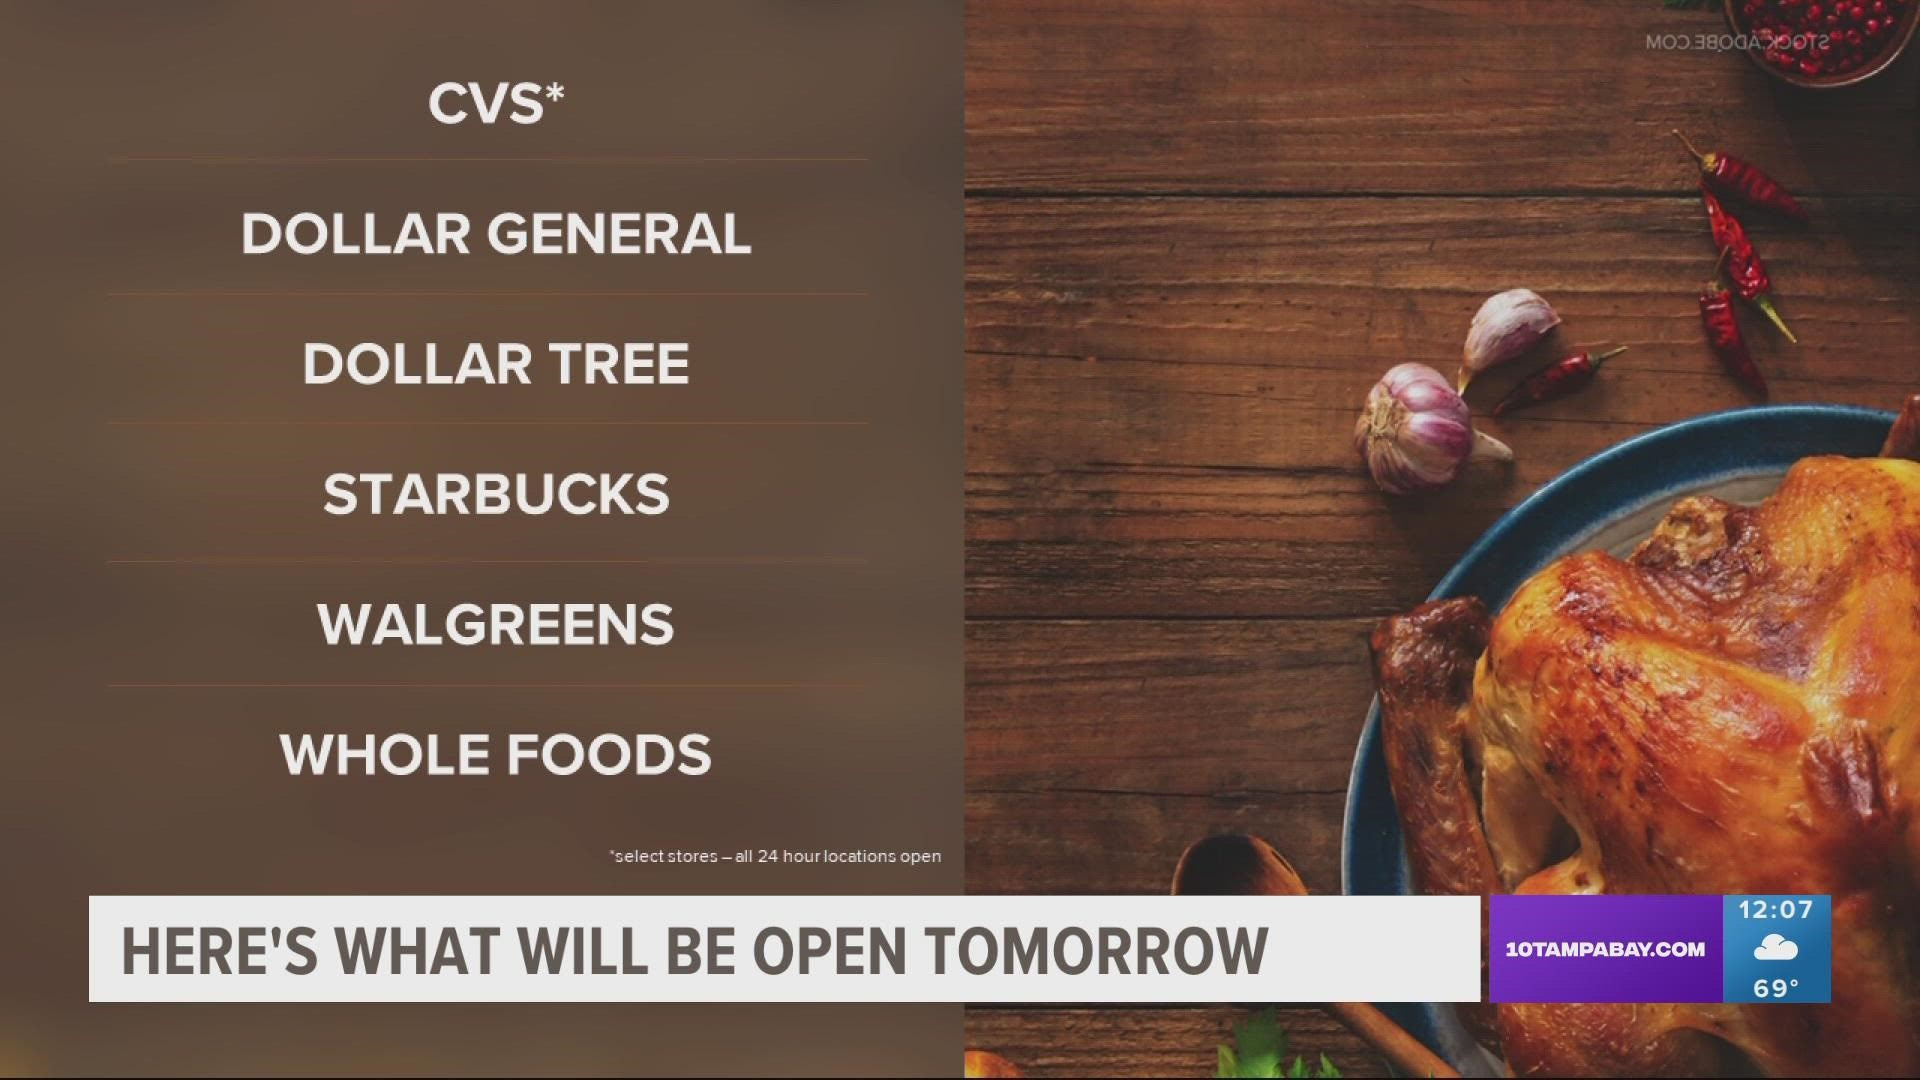 With most stores will be closed, there are a few that will remain open on Thanksgiving.